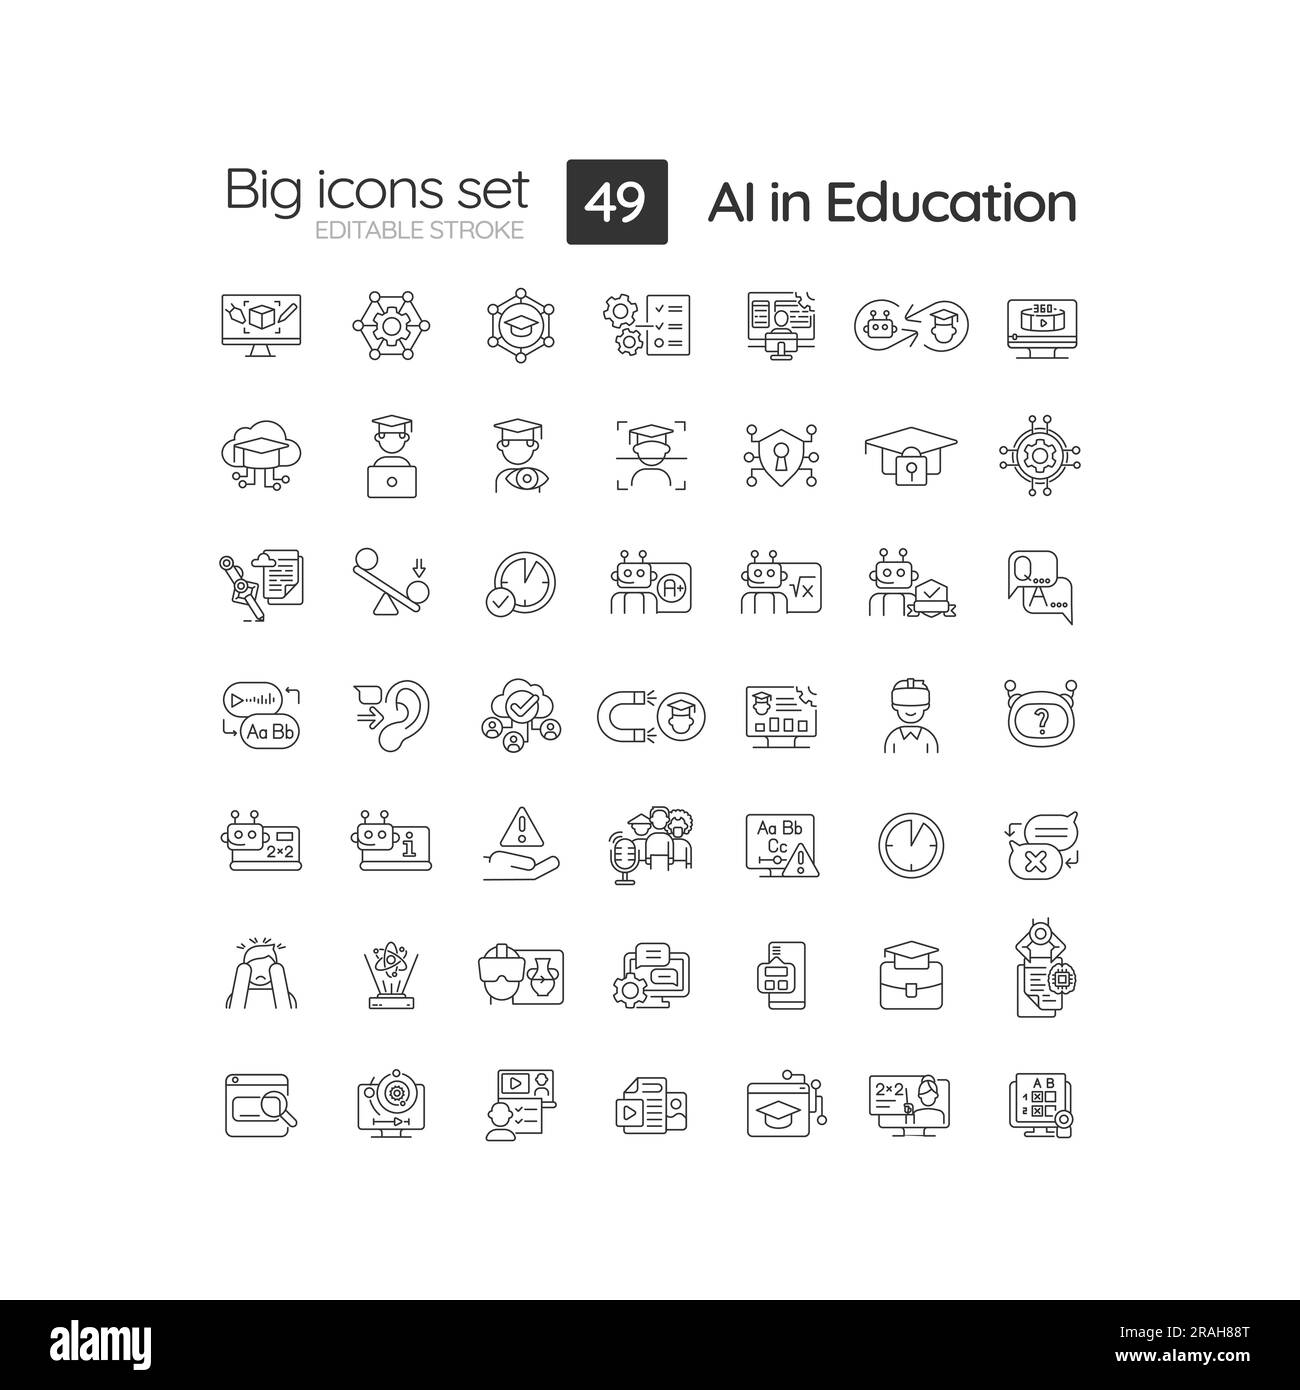 Customizable icons for AI in education Stock Vector